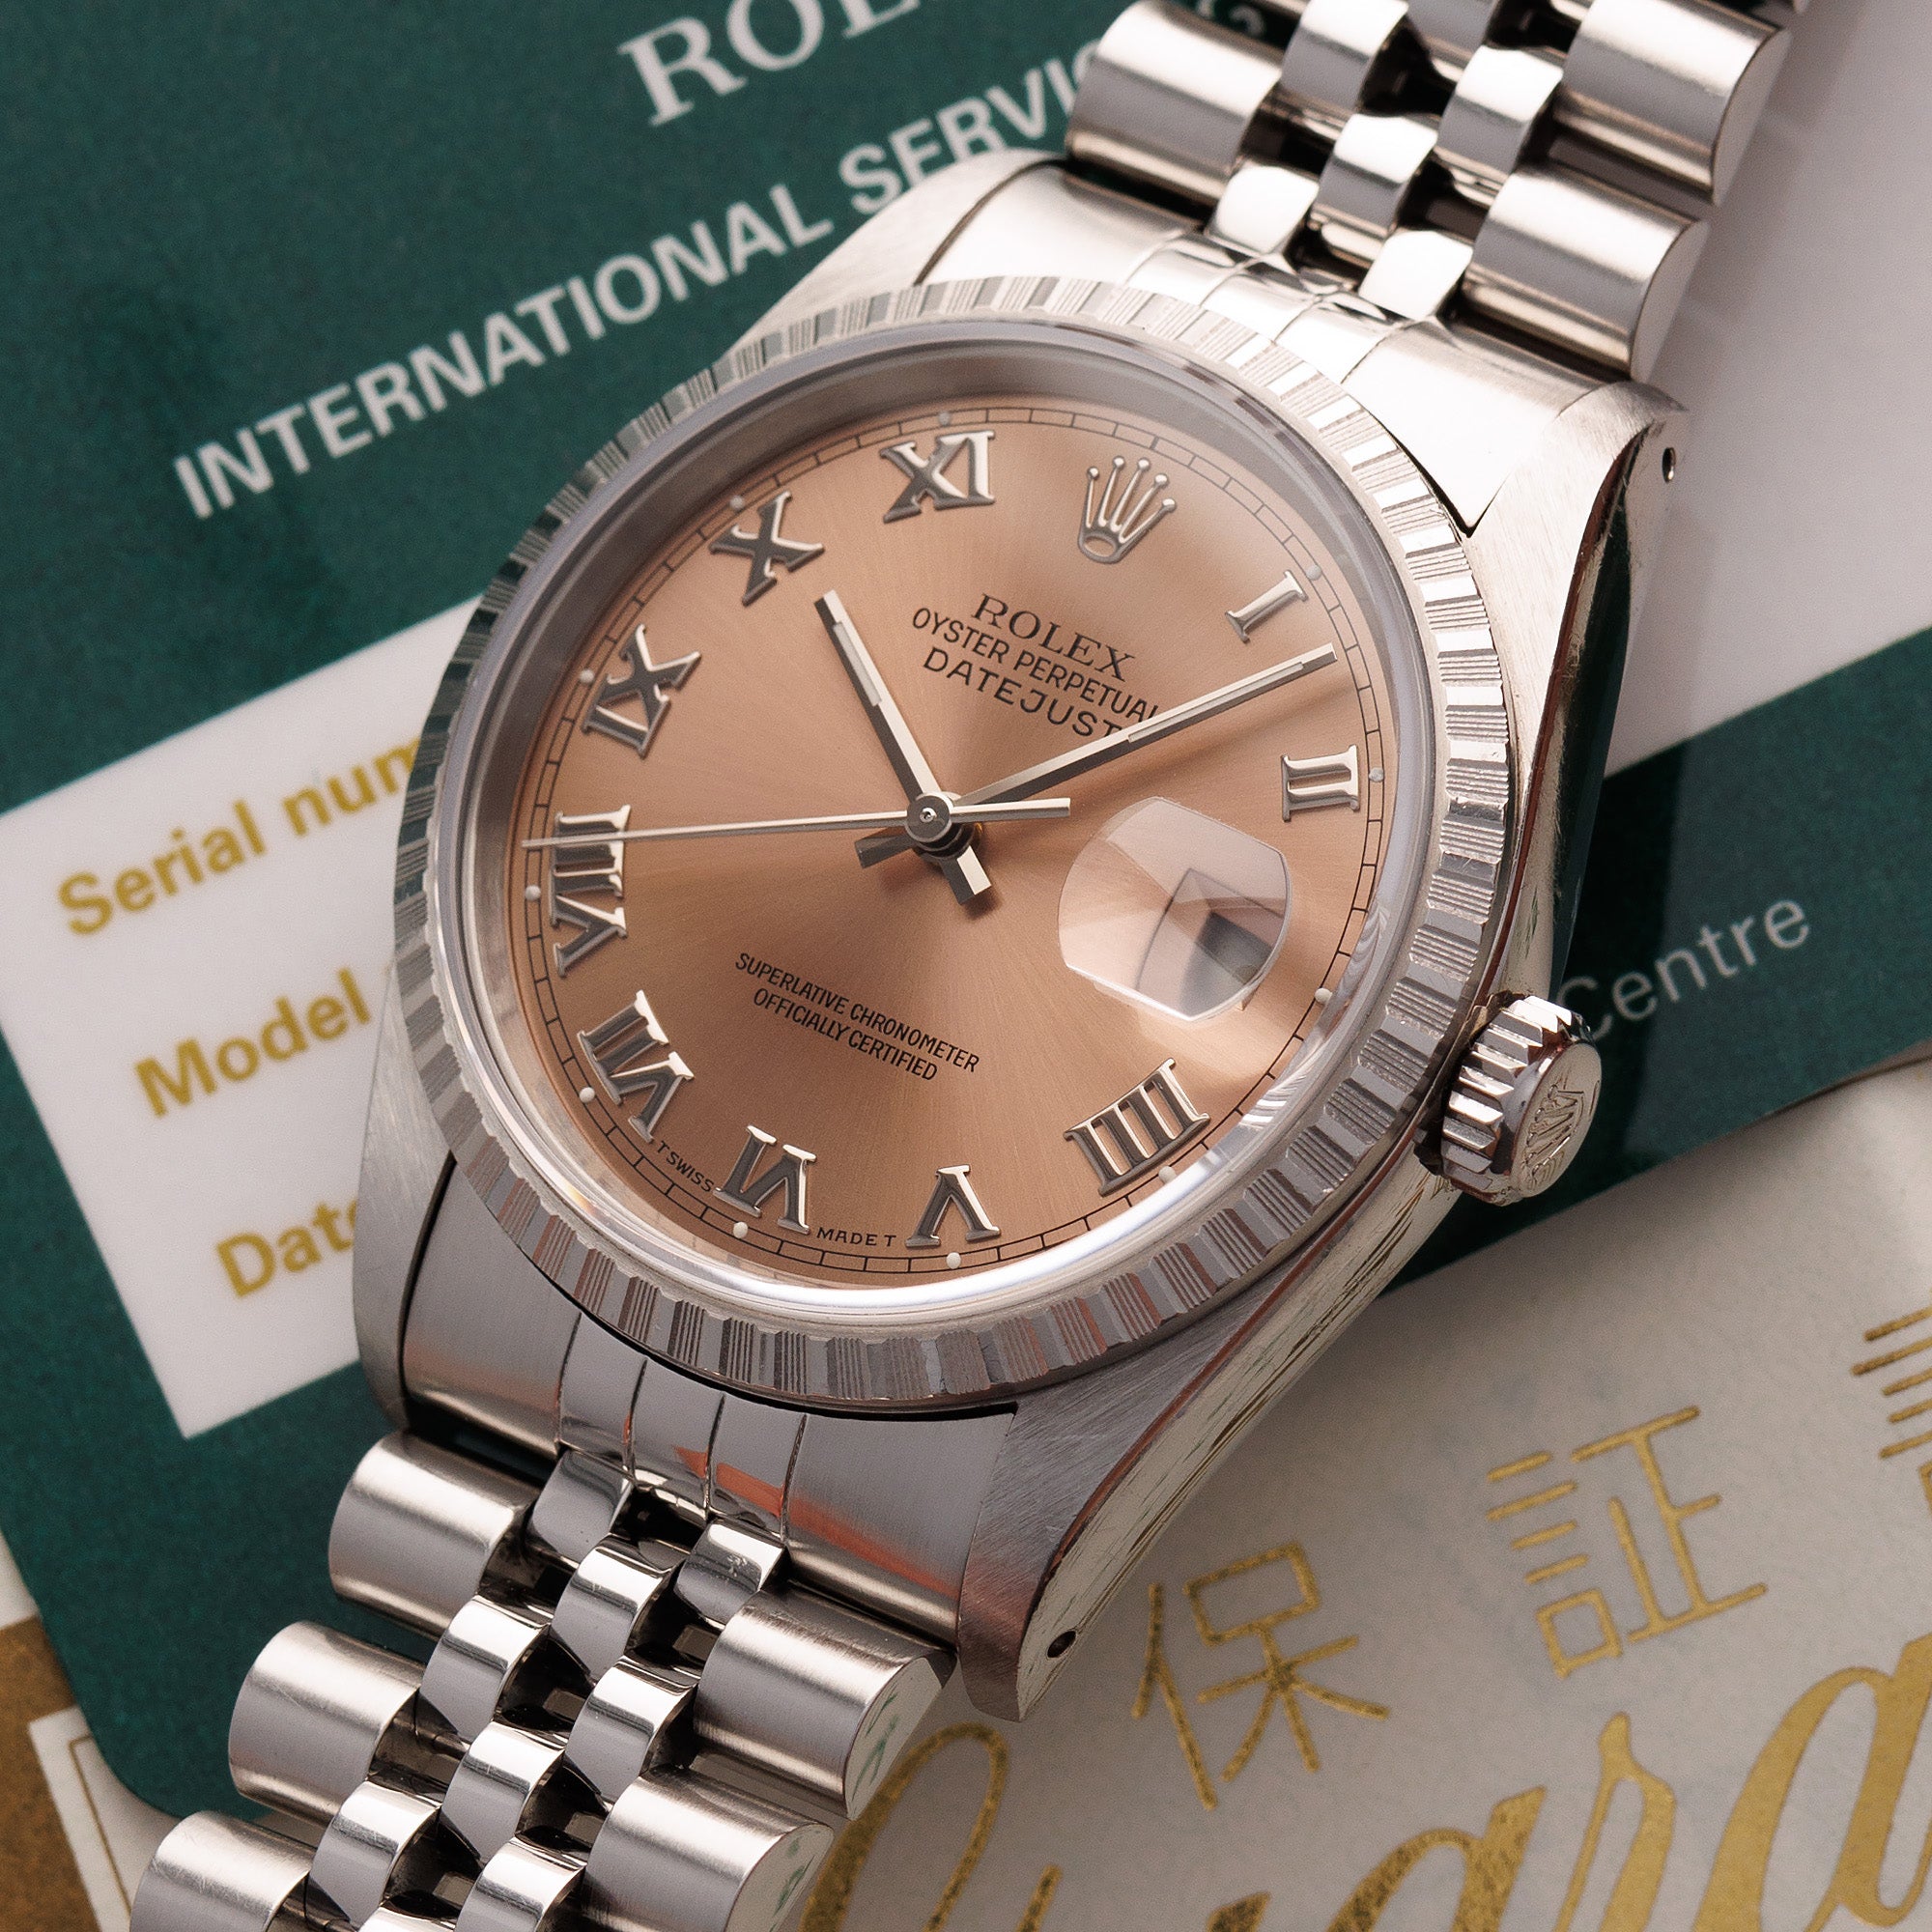 Rolex Steel Datejust Ref. 16220 with Salmon Dial